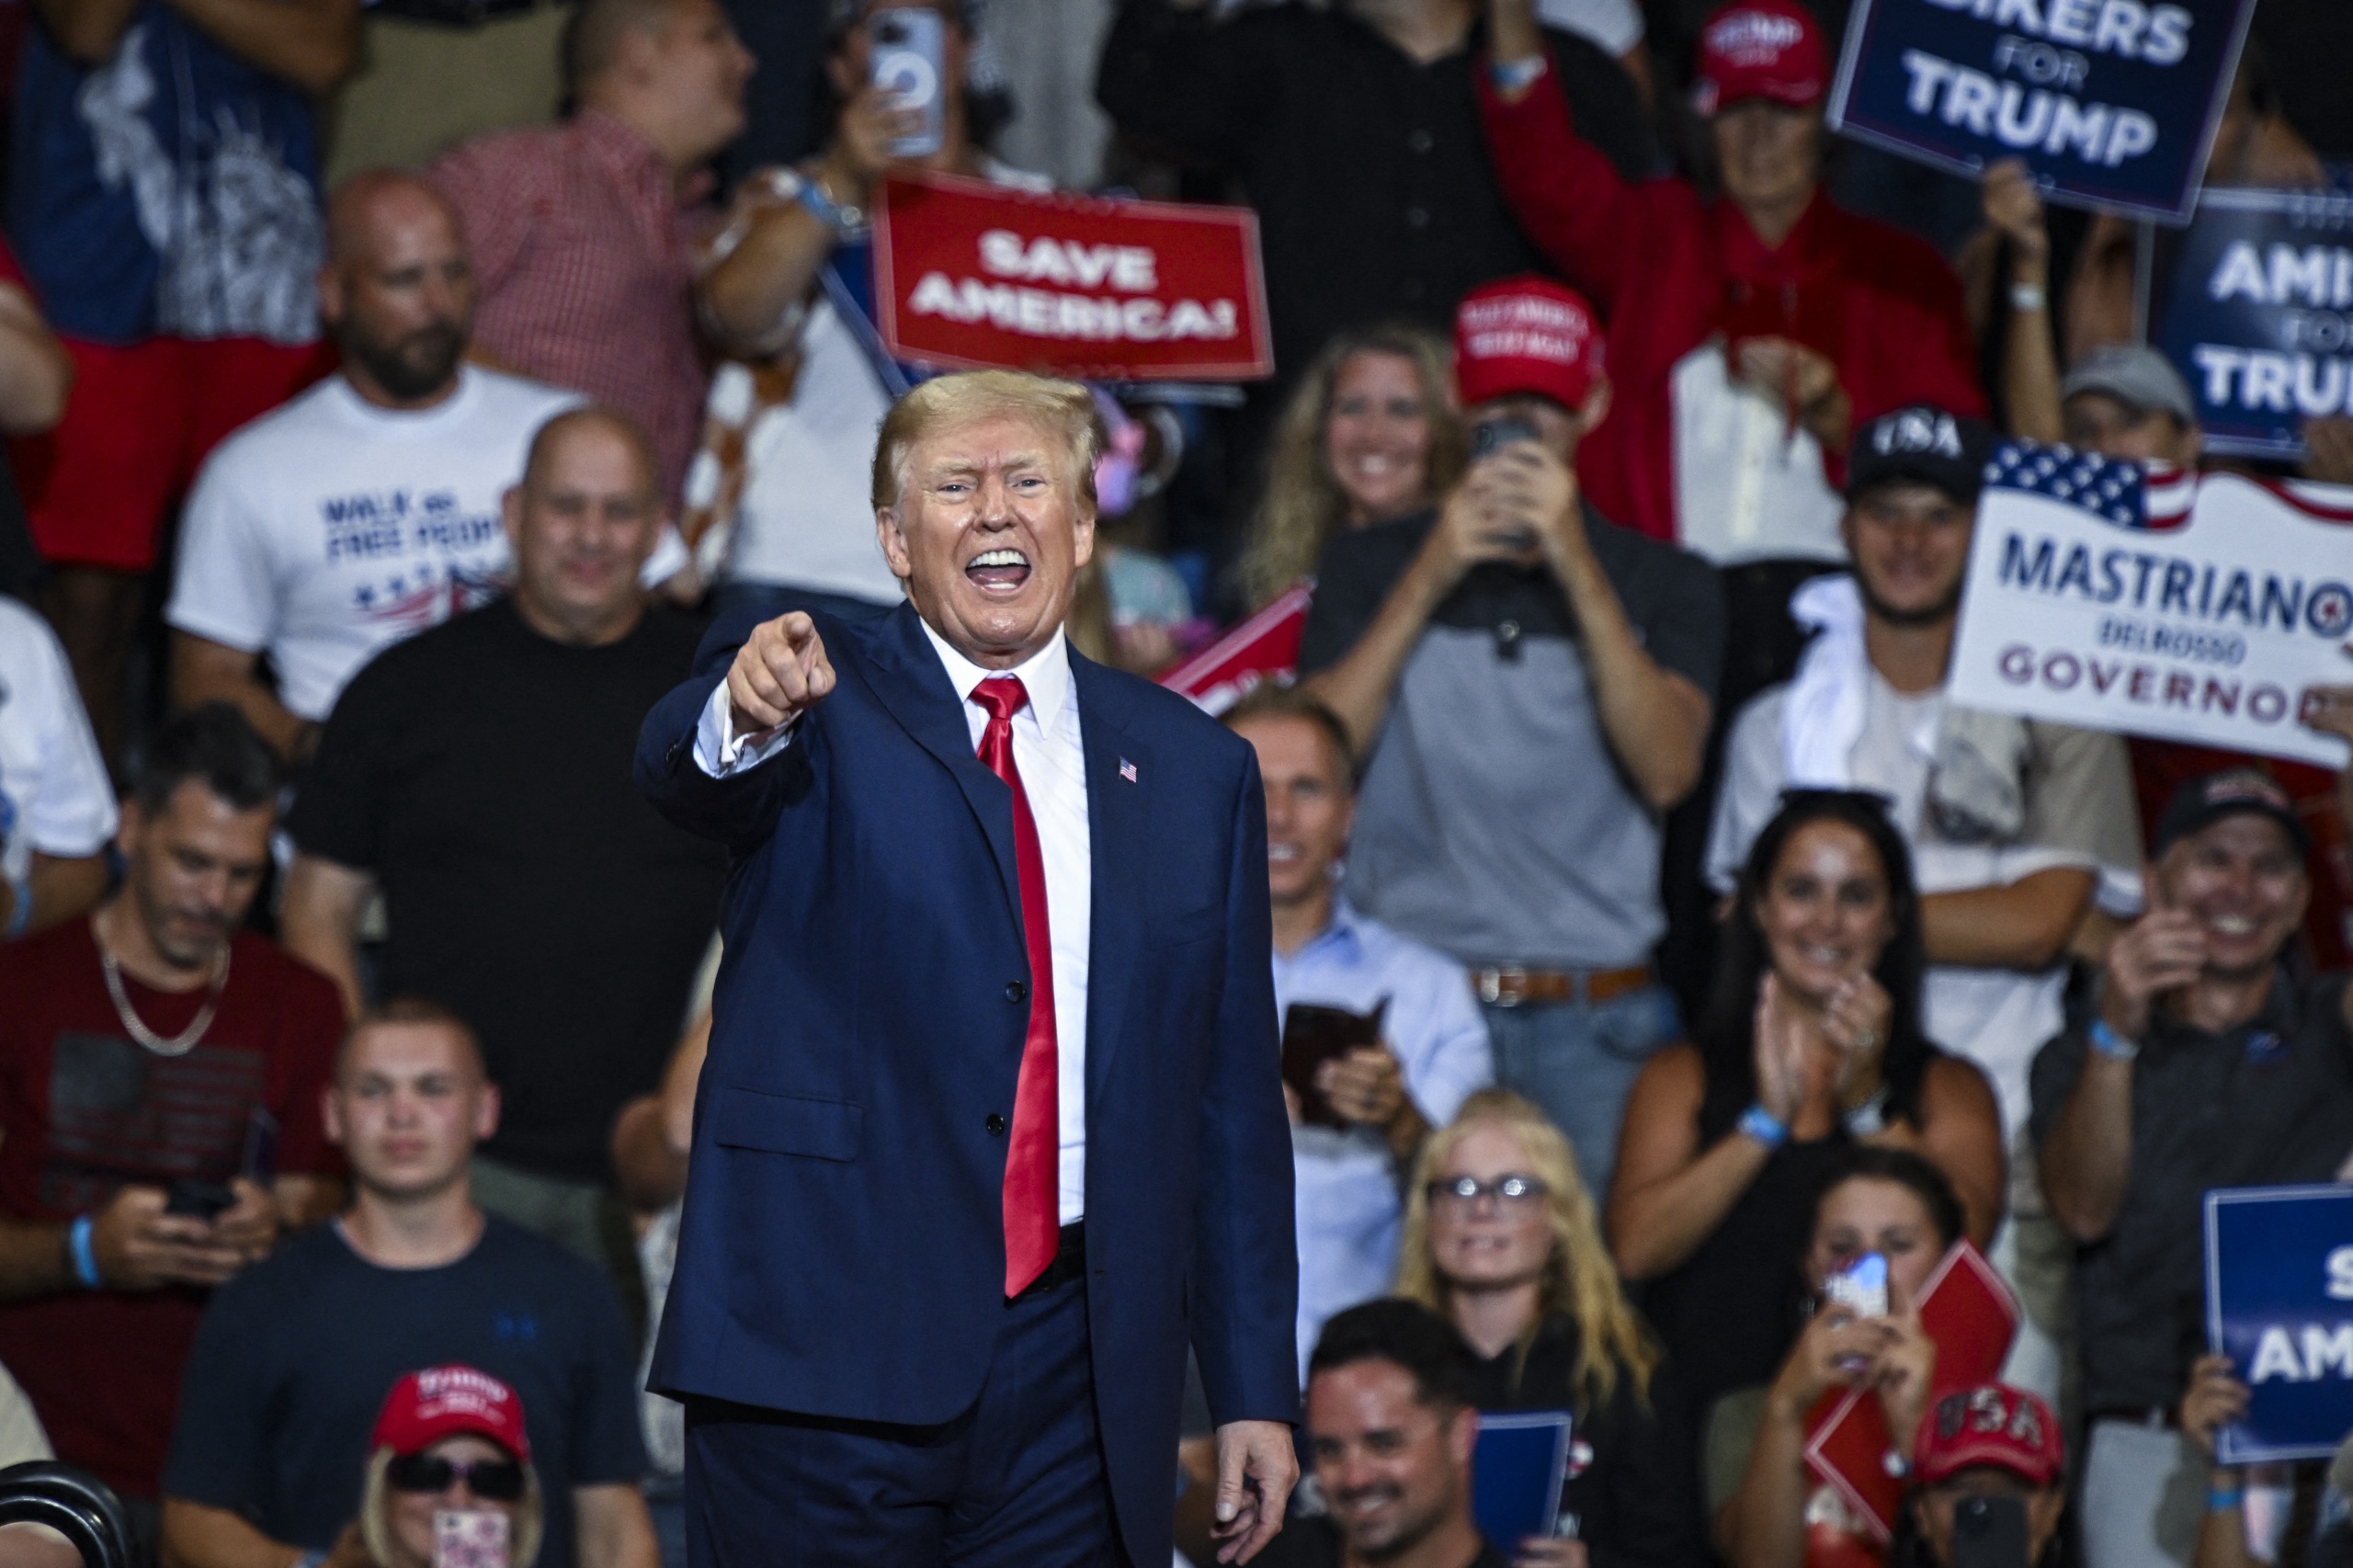 Former US President Donald Trump speaks during a campaign rally in support of Doug Mastriano for Governor of Pennsylvania and Mehmet Oz for US Senate at Mohegan Sun Arena in Wilkes-Barre, Pennsylvania on September 3, 2022.   Ed JONES / AFP